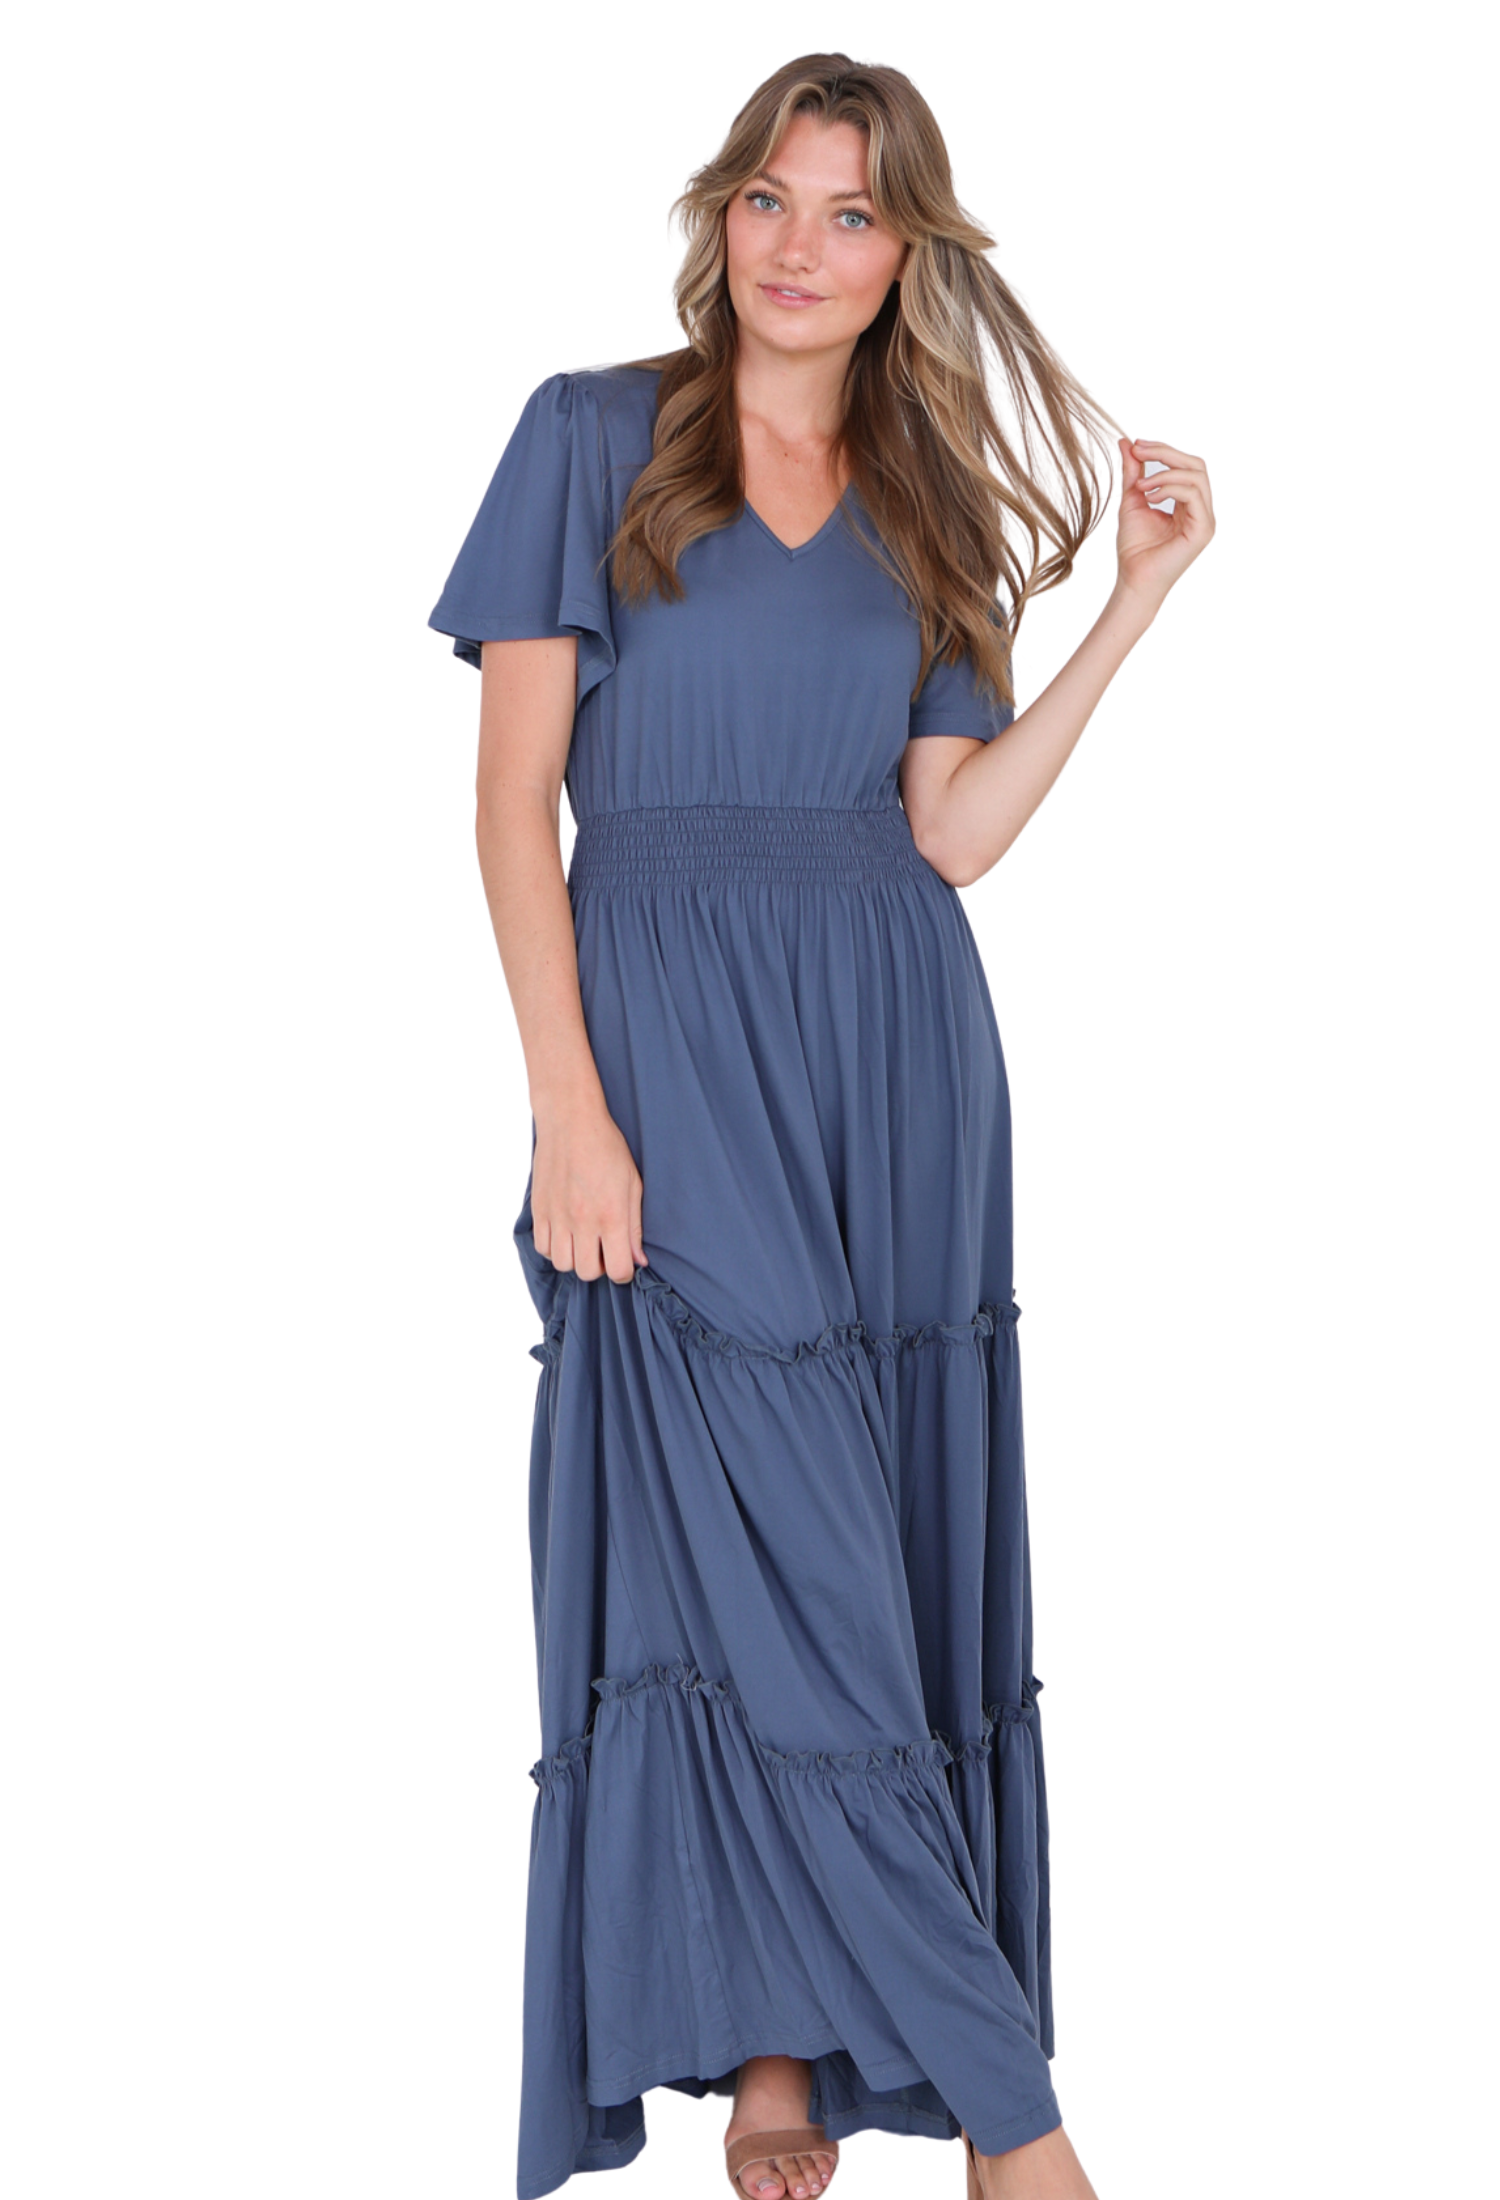 Cove in Nightshadow Blue Modest Maxi